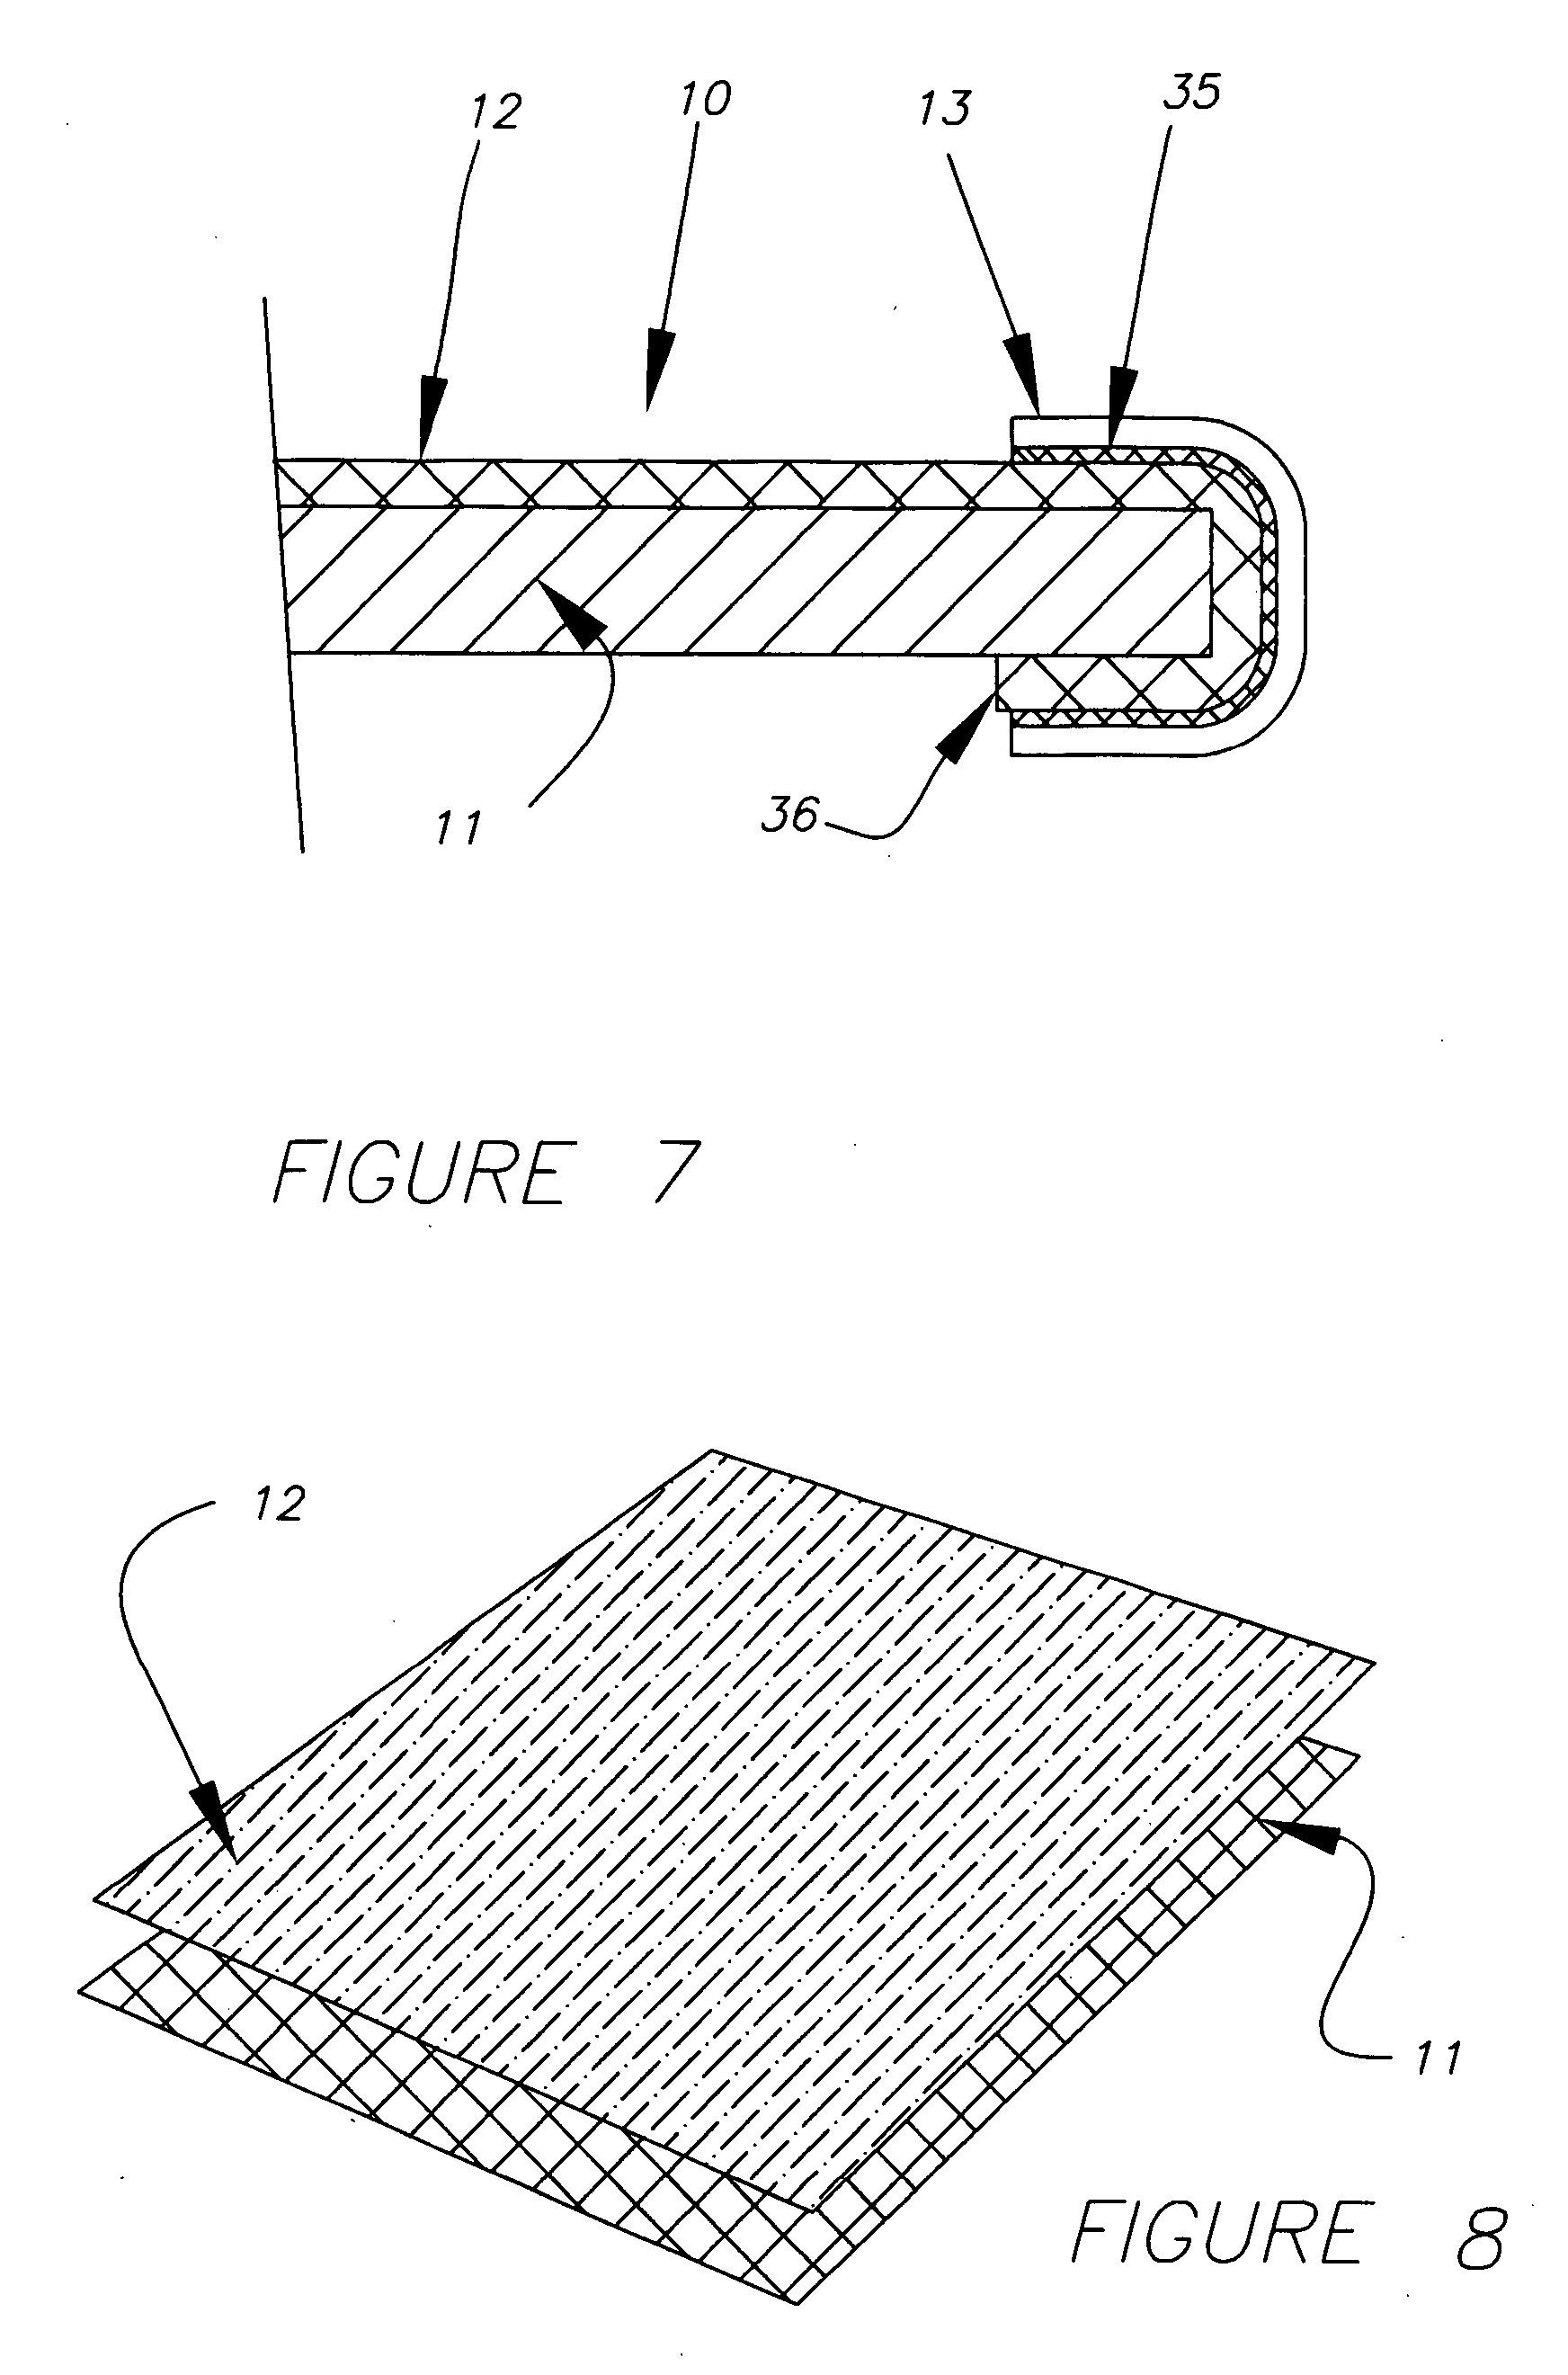 Grate cover apparatus and method